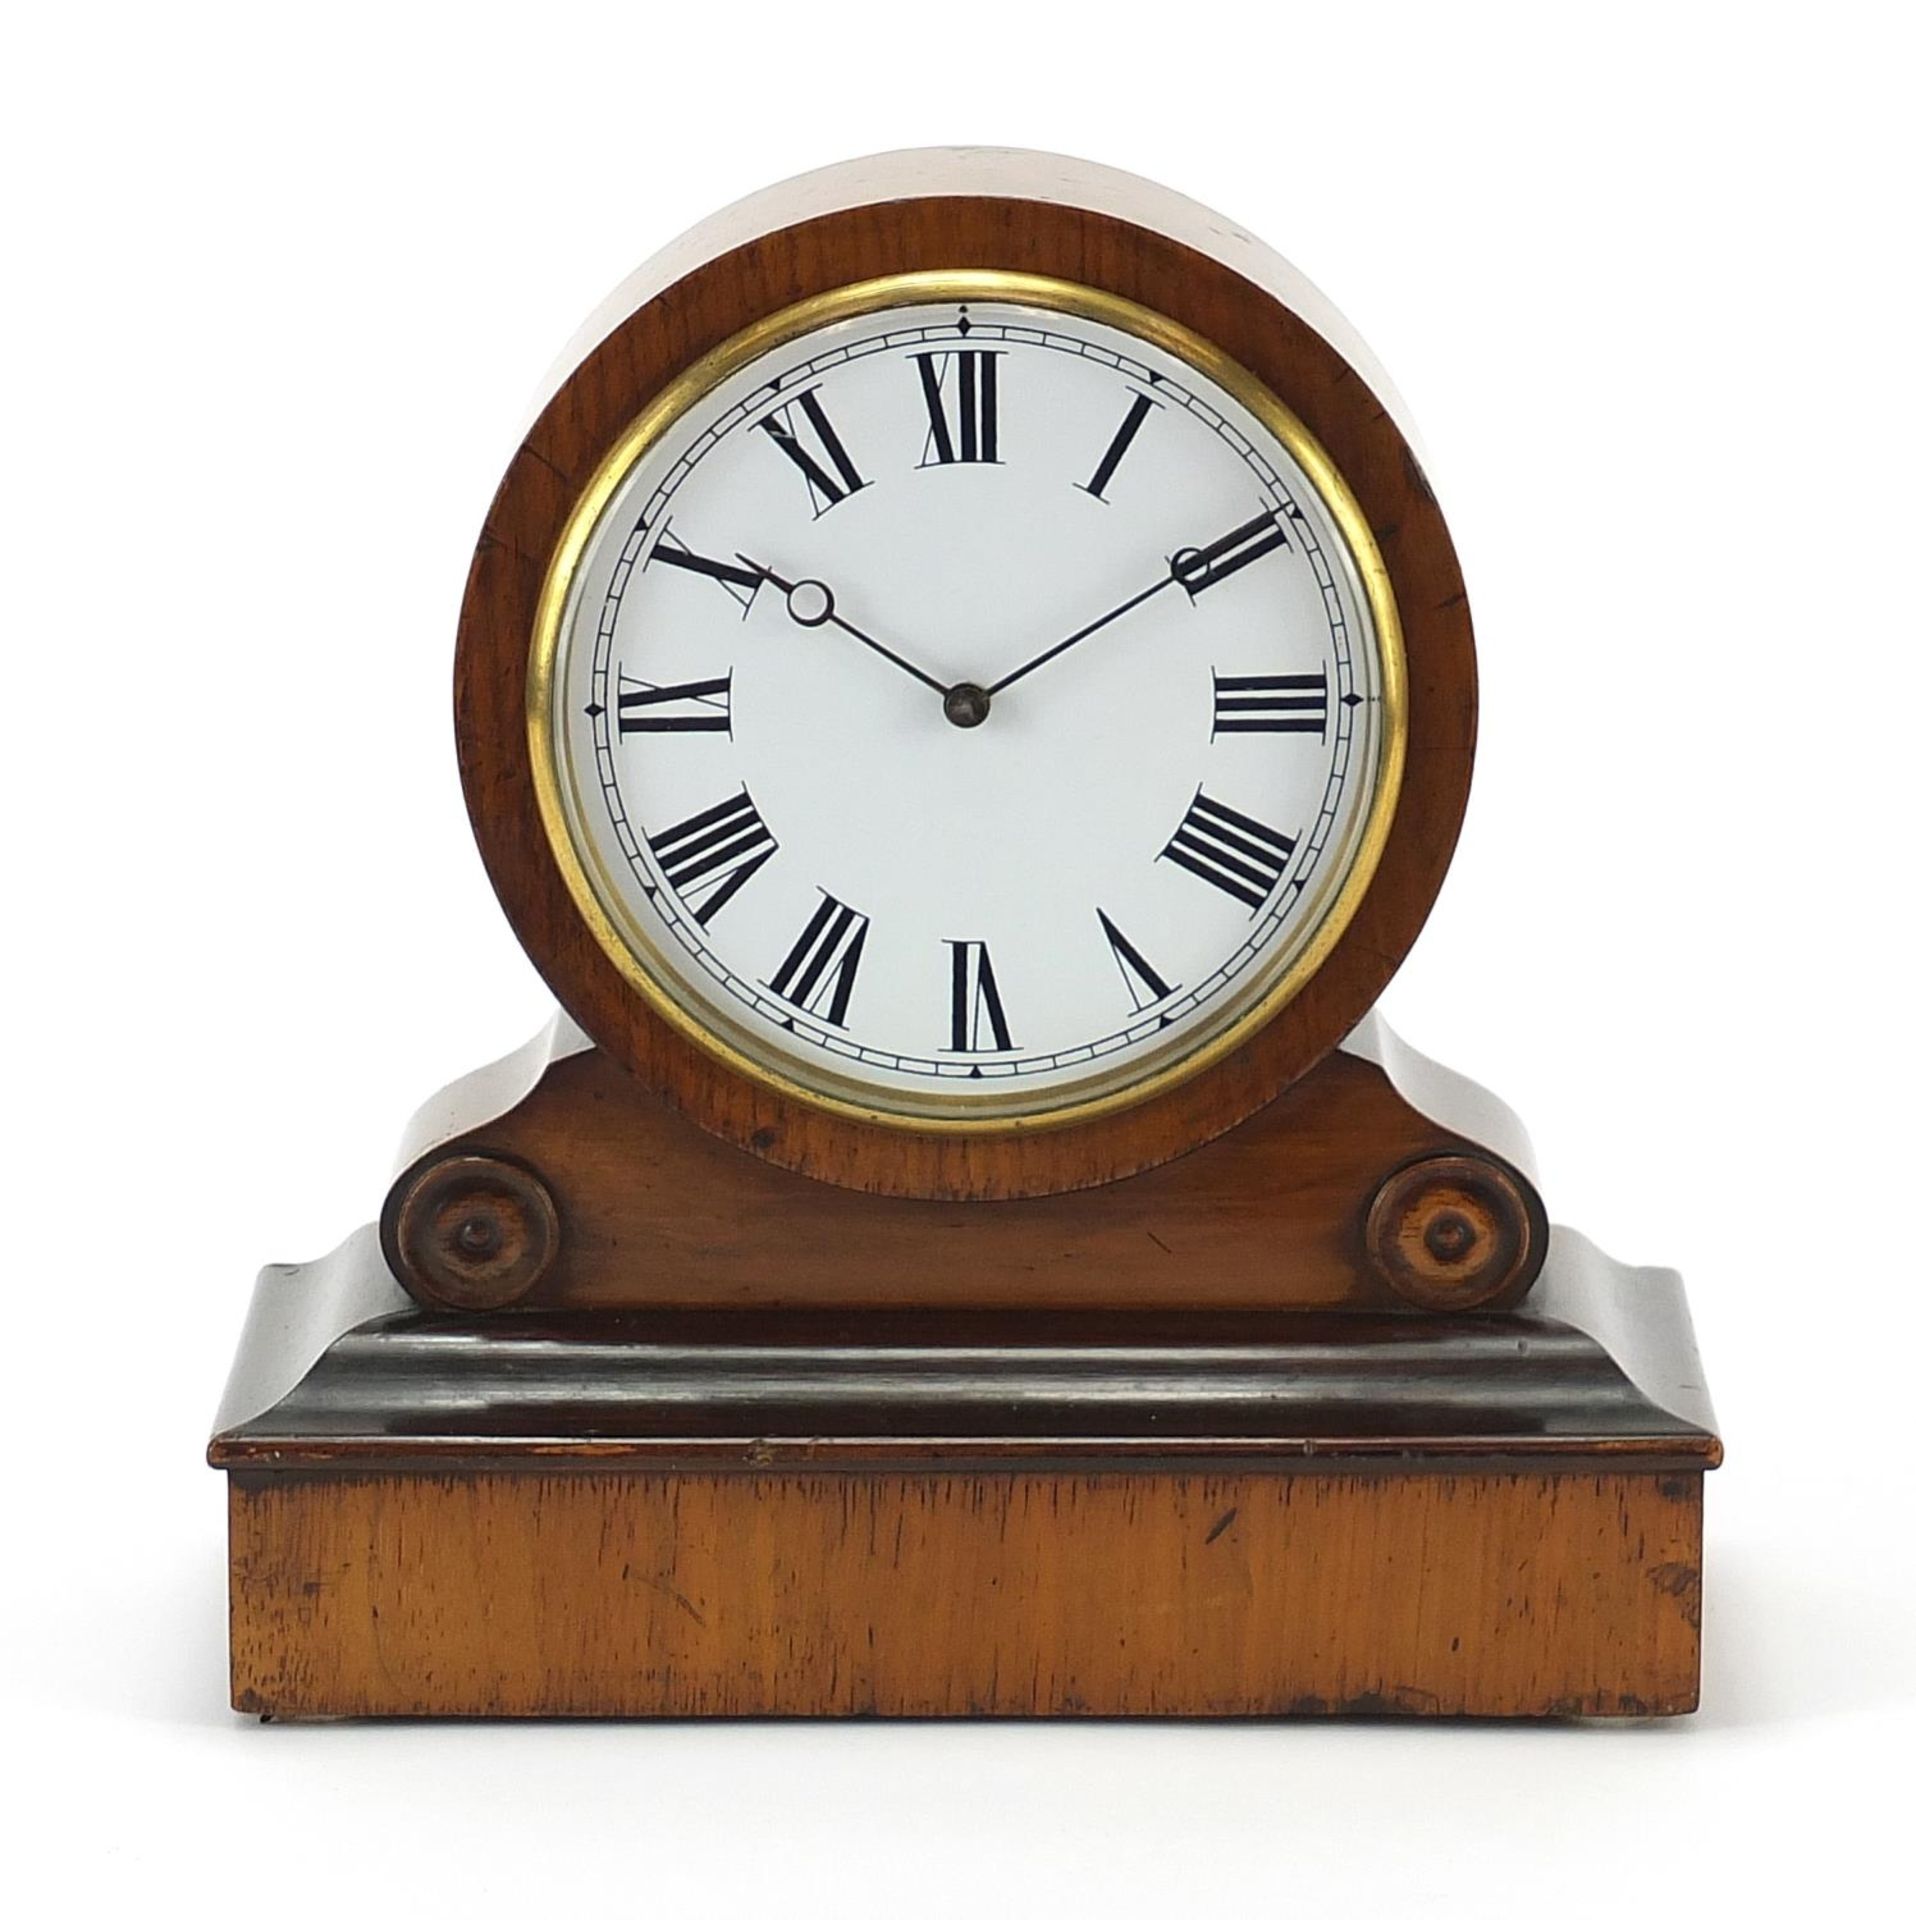 19th century walnut mantle clock with Roman numerals, the movement impressed V.A.P Brevete, 22.5cm - Image 2 of 7